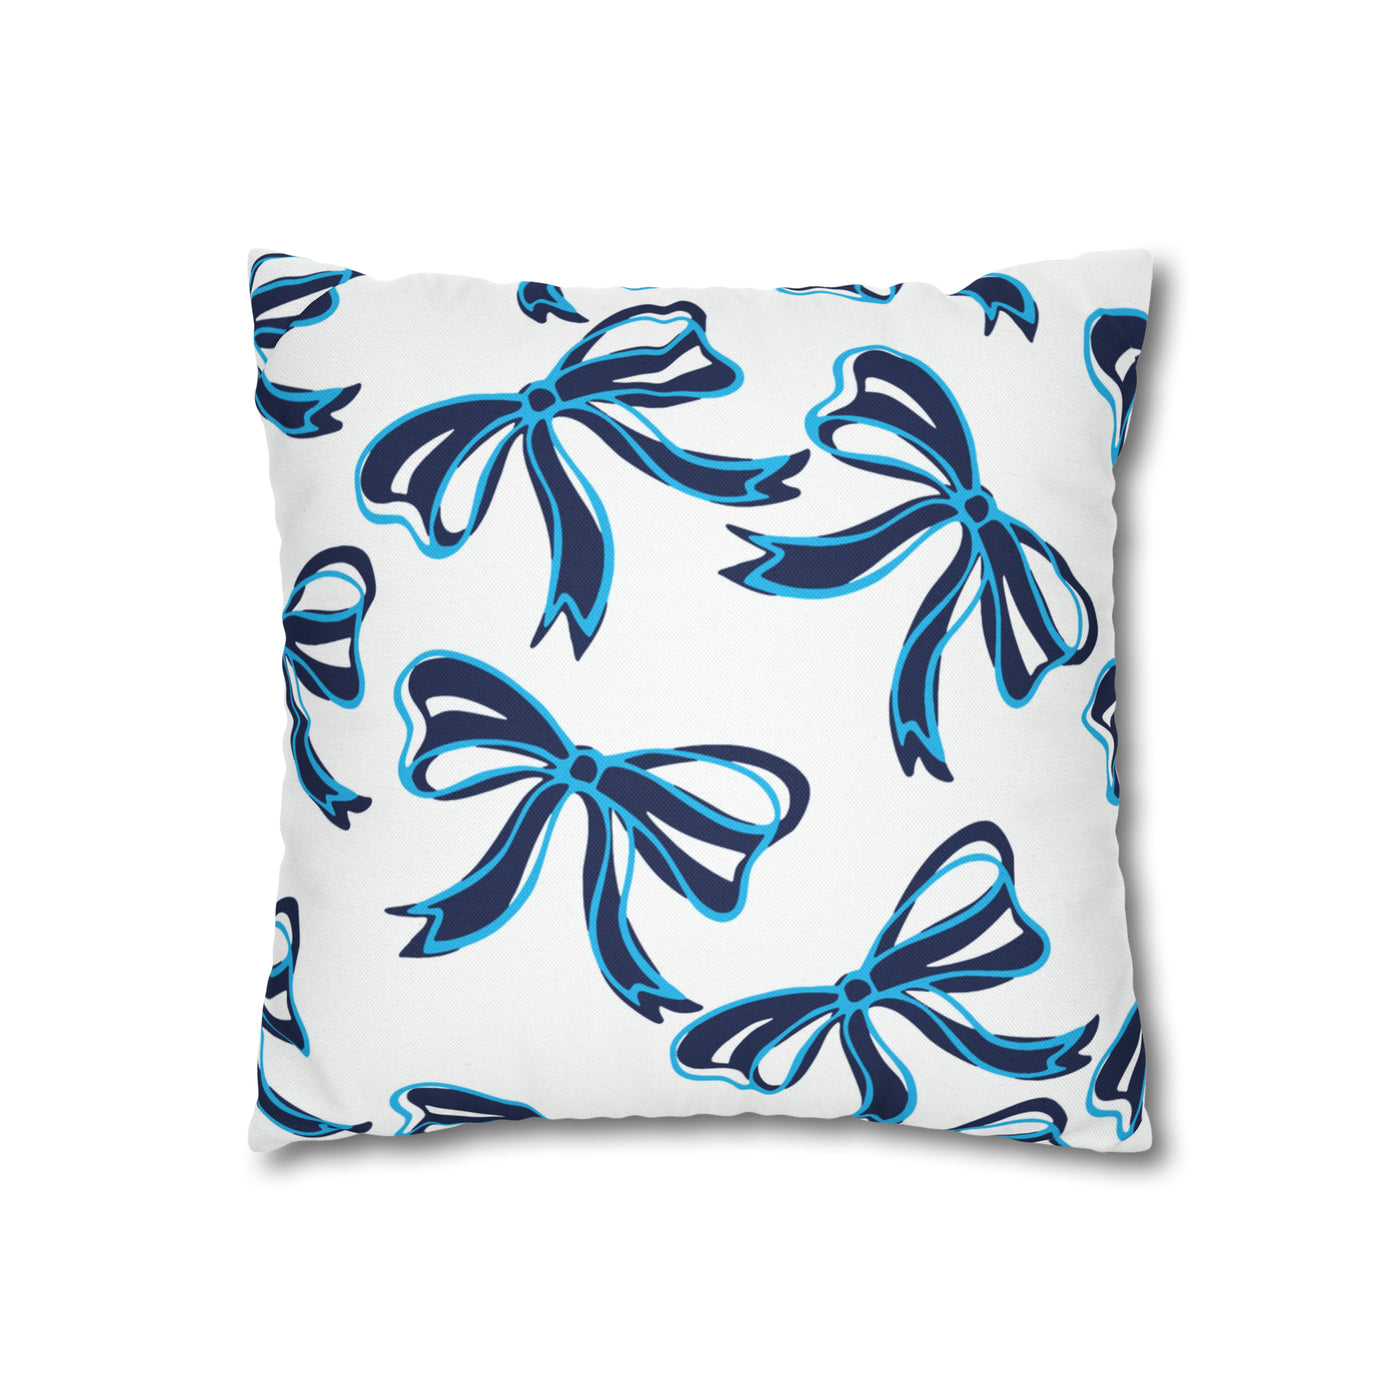 Trendy Bow College Pillow Cover - Dorm Pillow, Graduation Gift,Bed Party Gift,Acceptance Gift,College Gift, VIllanova, Penn State, UConn